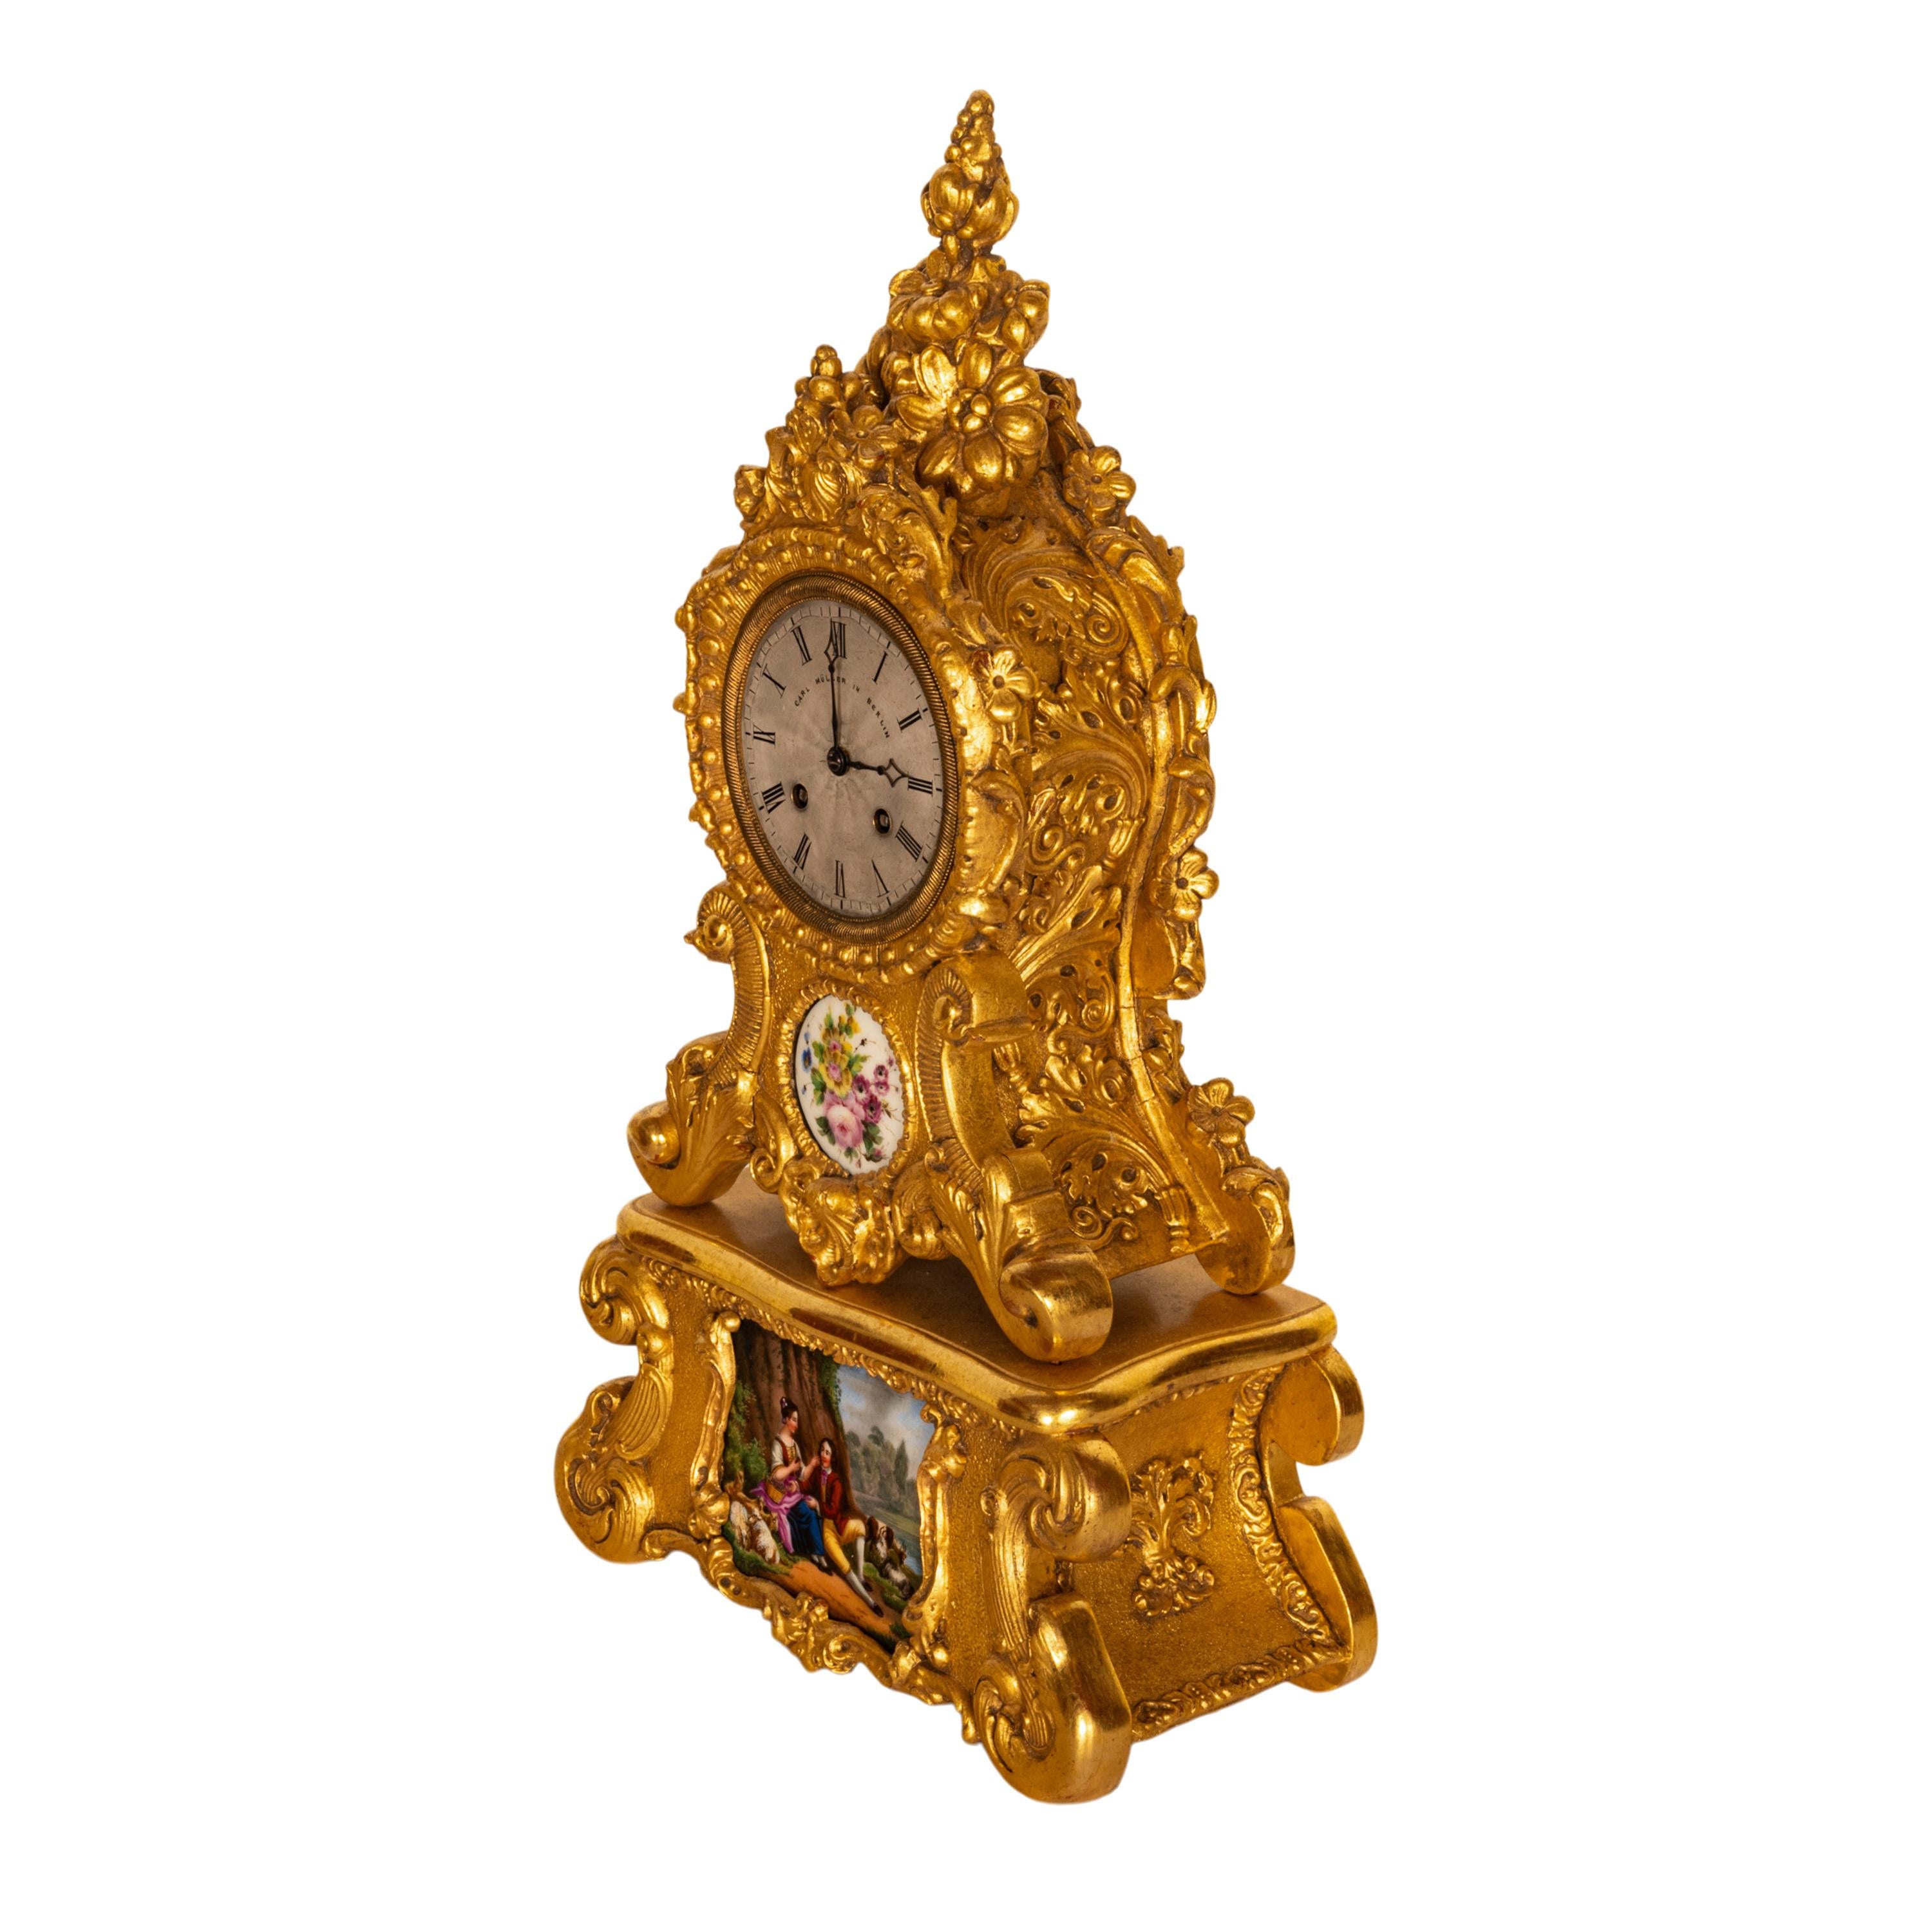 Fine Antique 19th Century French Rococo Gilded 8 Day Clock Sevres Porcelain 1830 For Sale 4